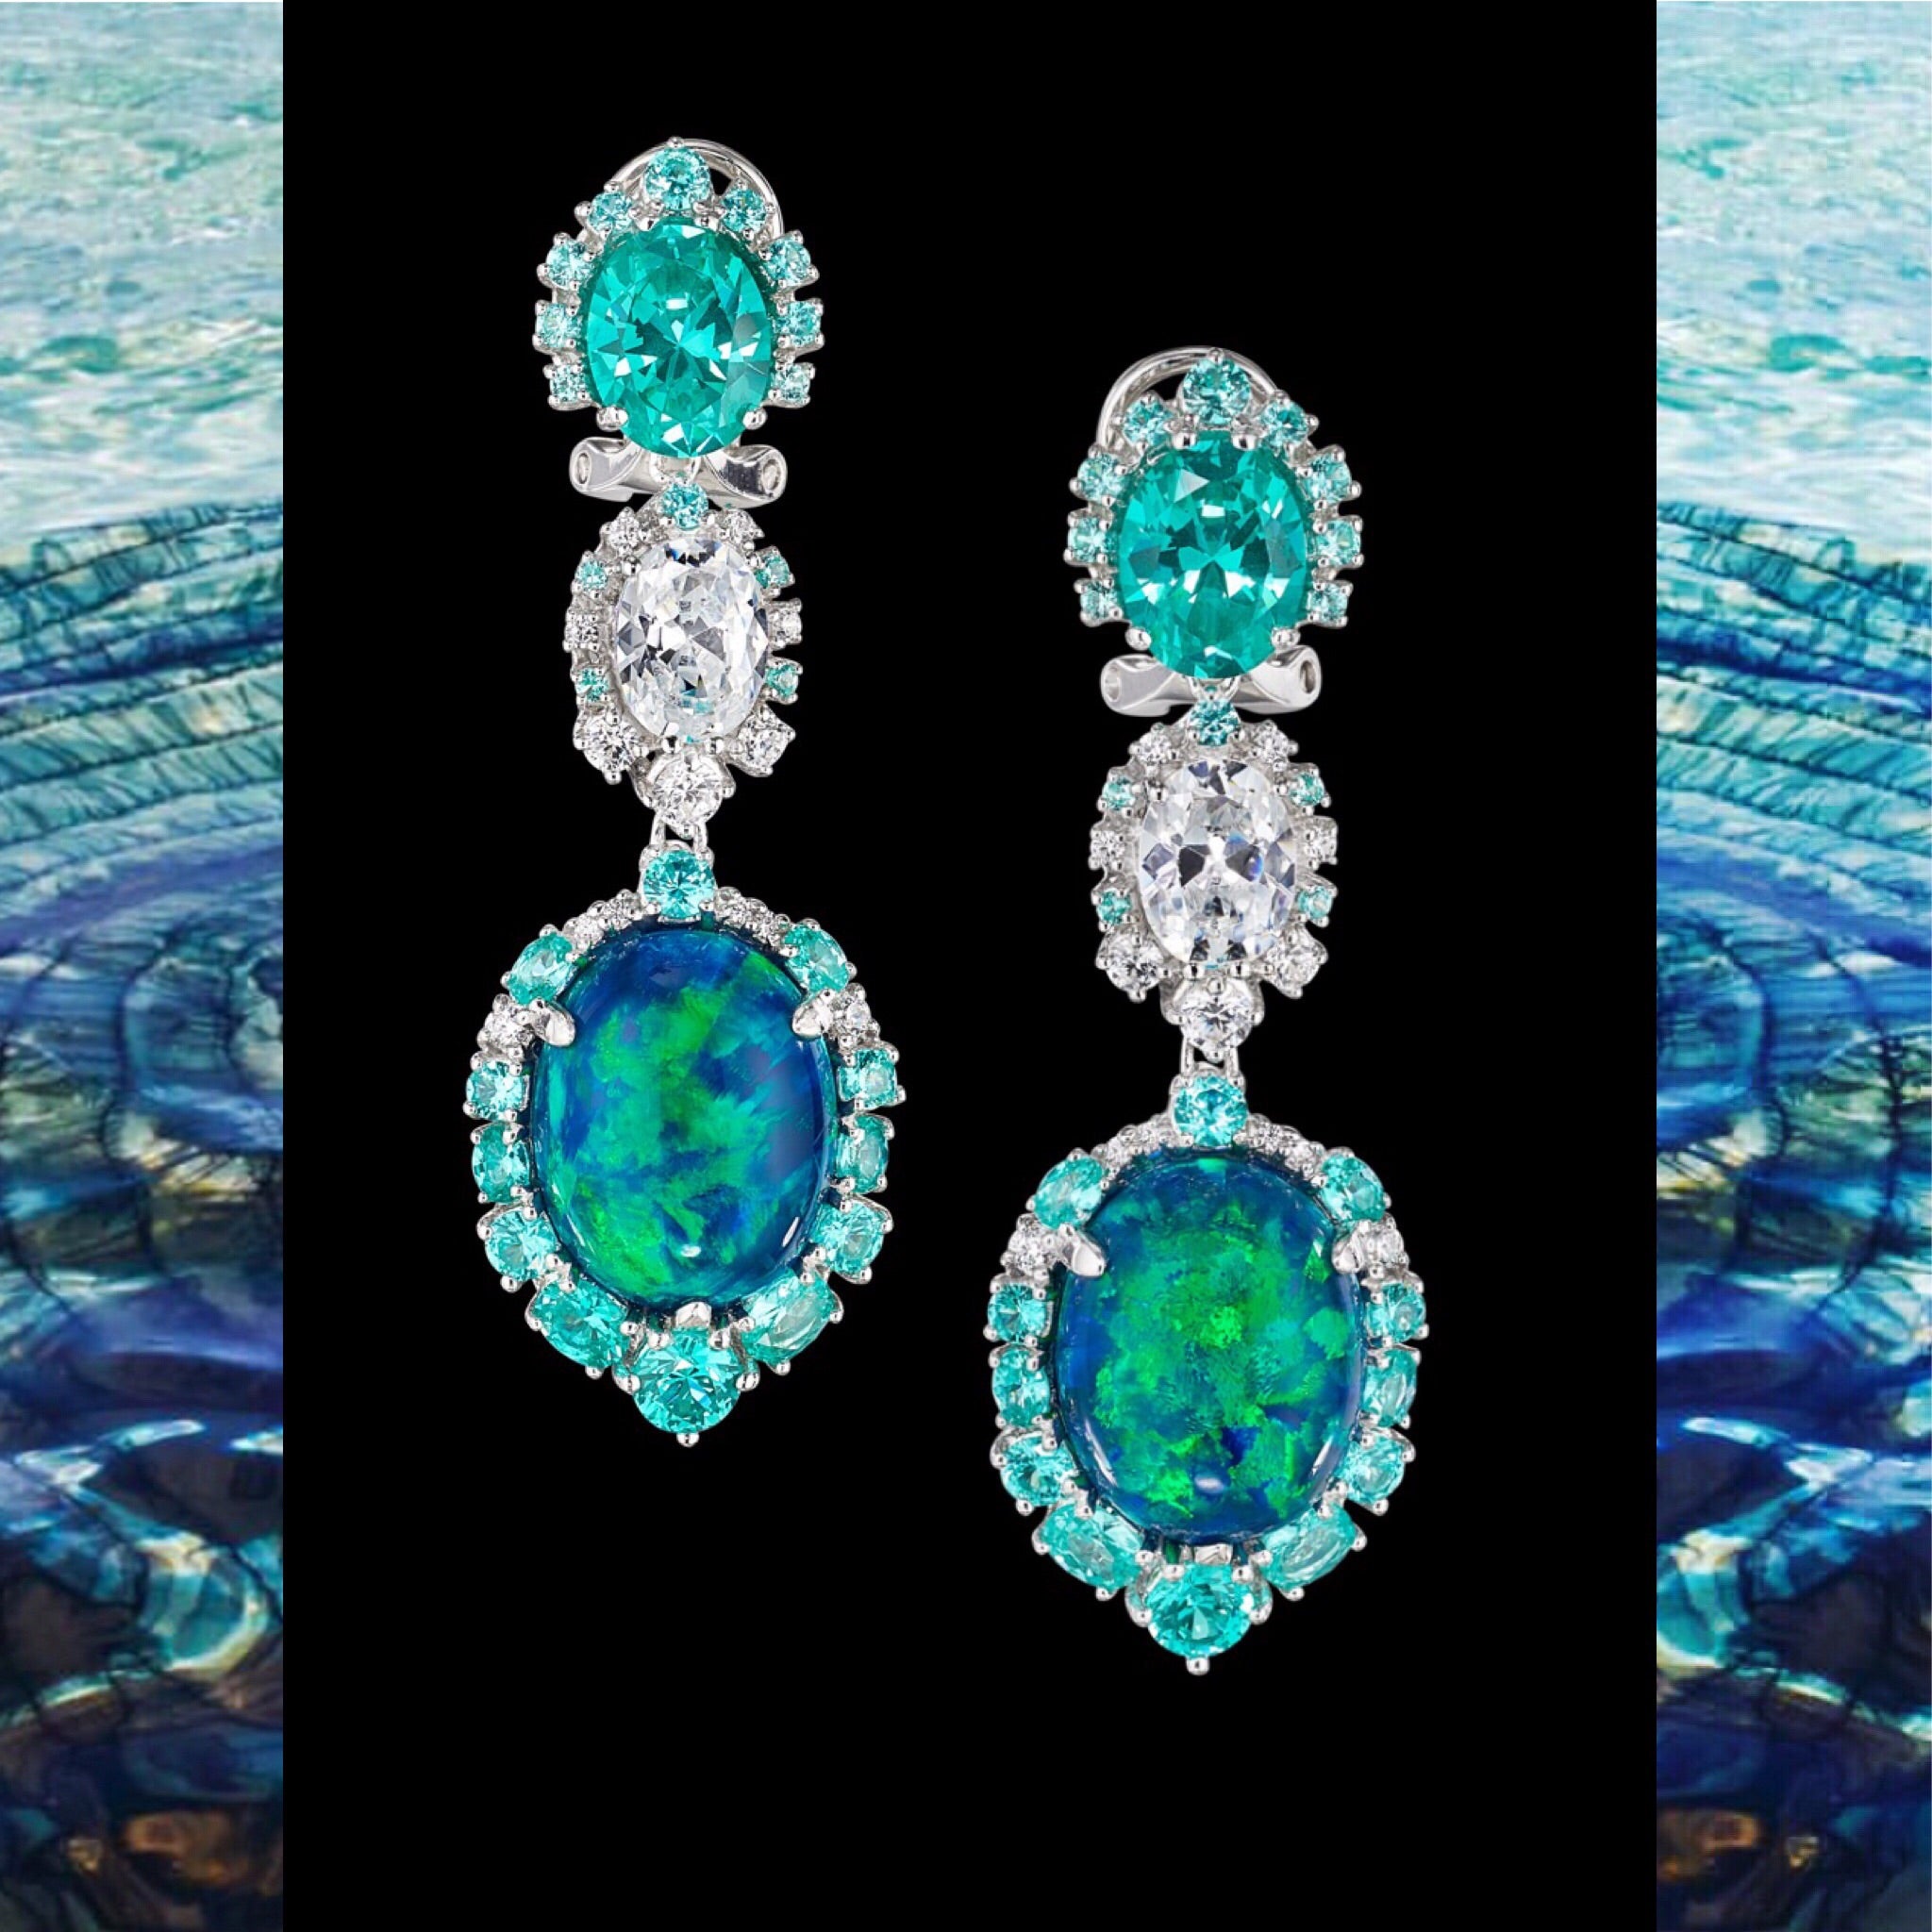 Paraiba Ocean Drop Earrings, Earrings, Anabela Chan Joaillerie - Fine jewelry with laboratory grown and created gemstones hand-crafted in the United Kingdom. Anabela Chan Joaillerie is the first fine jewellery brand in the world to champion laboratory-grown and created gemstones with high jewellery design, artisanal craftsmanship and a focus on ethical and sustainable innovations.